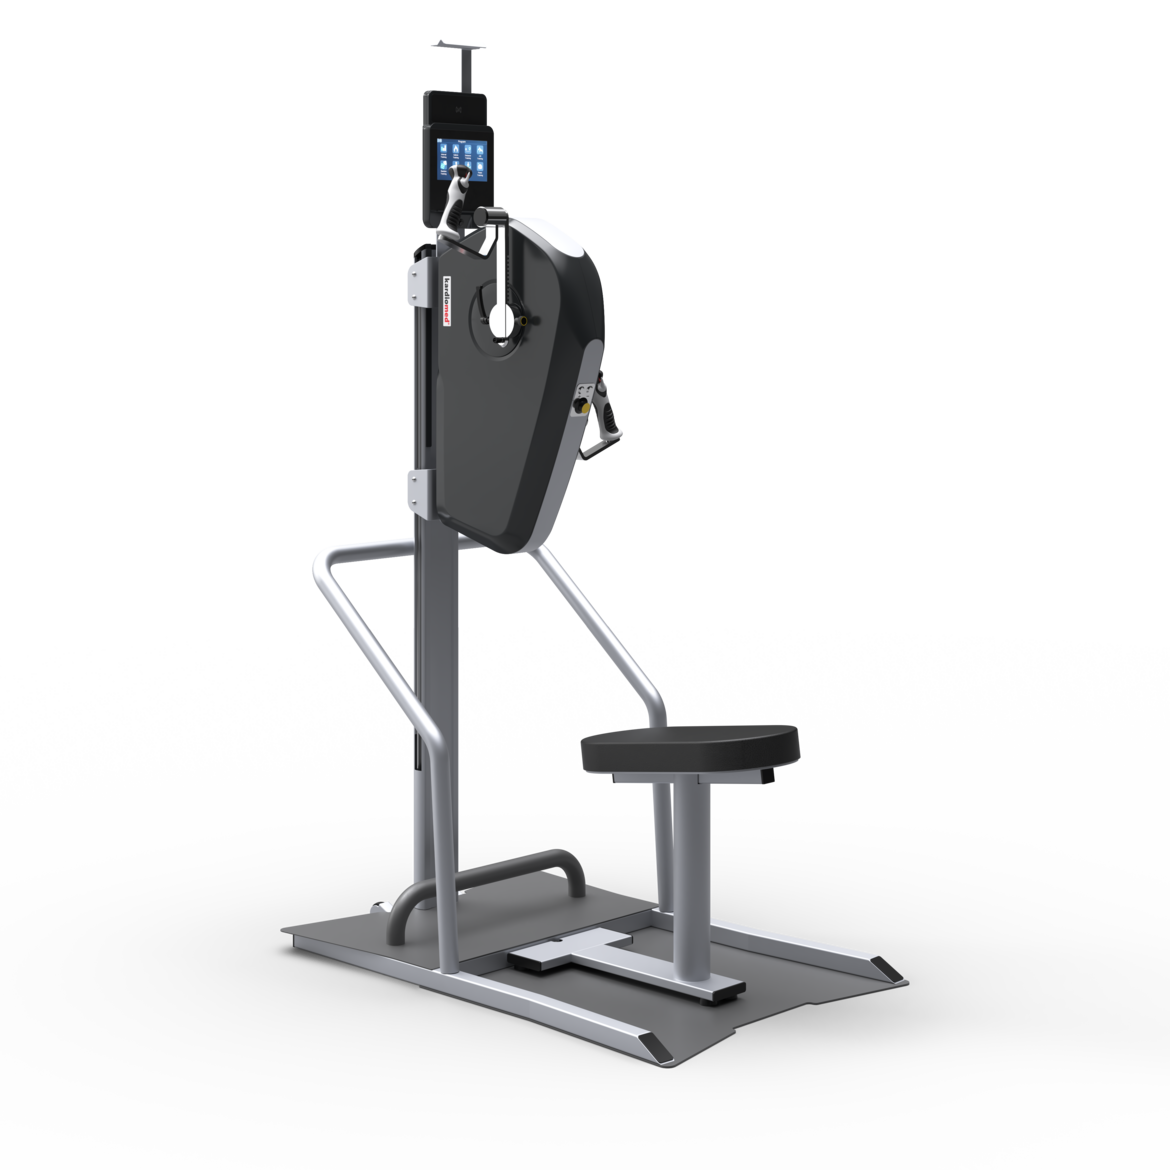 kardiomed 540 Upper Body Cycle